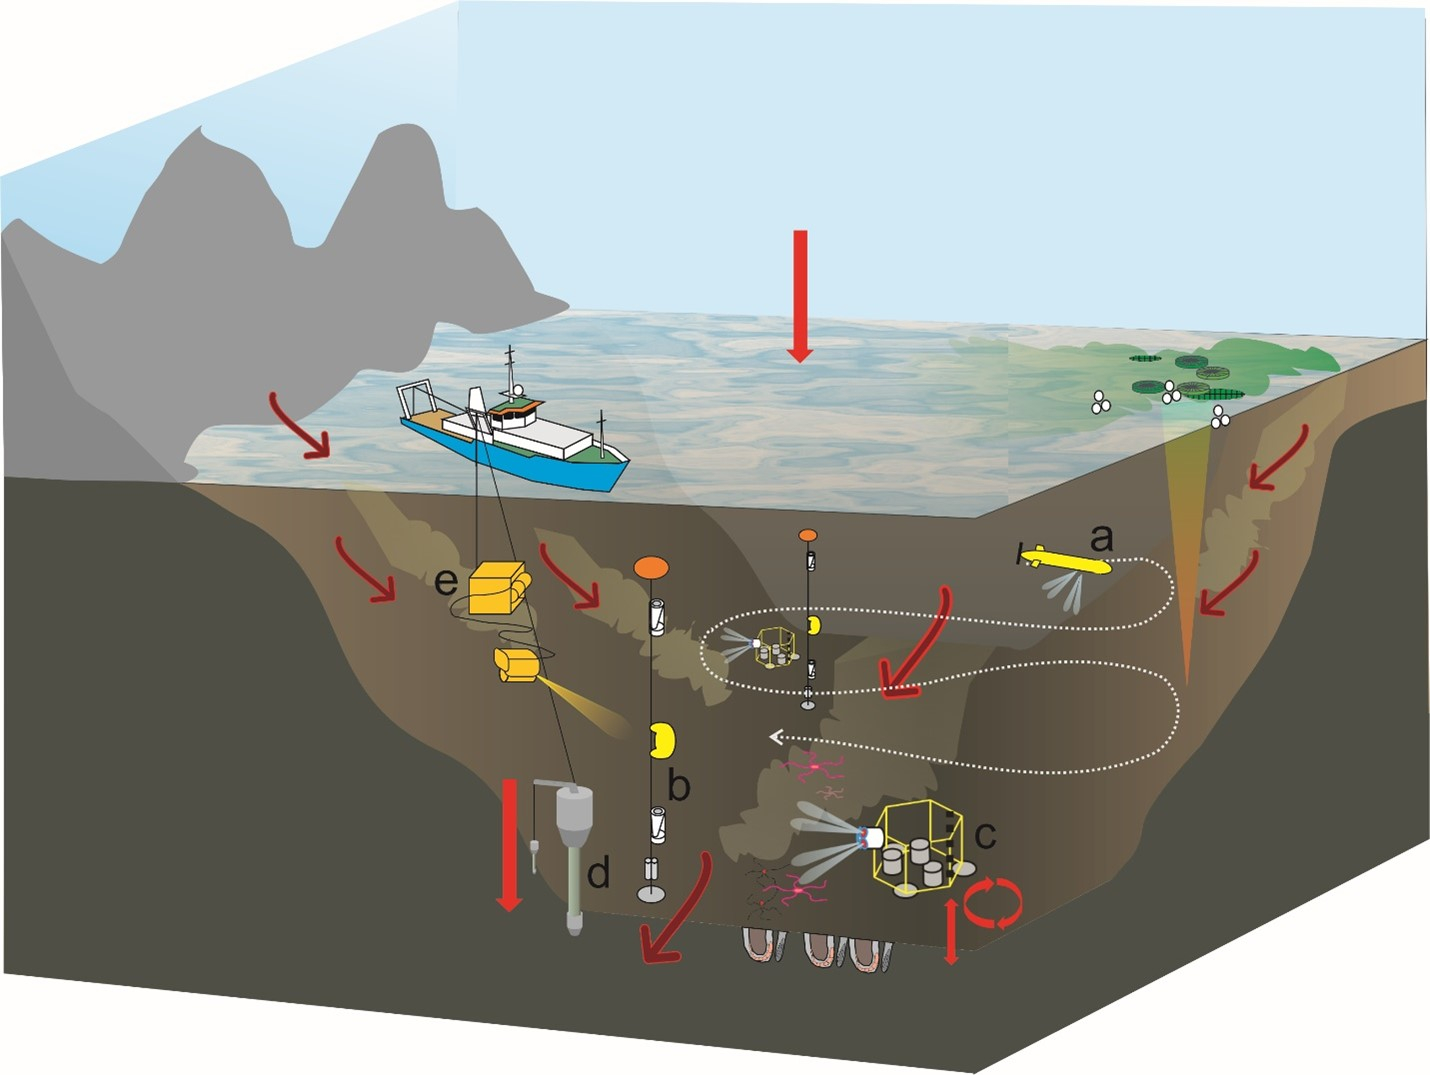 Schematic overview of the processes to be investigated in the Norwegian Trench controlling carbon and nutrient cycling and some of the techniques to be deployed by NoSE  a. Glider, b. Mooring, c. Lander, d. Piston corer, e. Remotely operated vehicle (ROV)